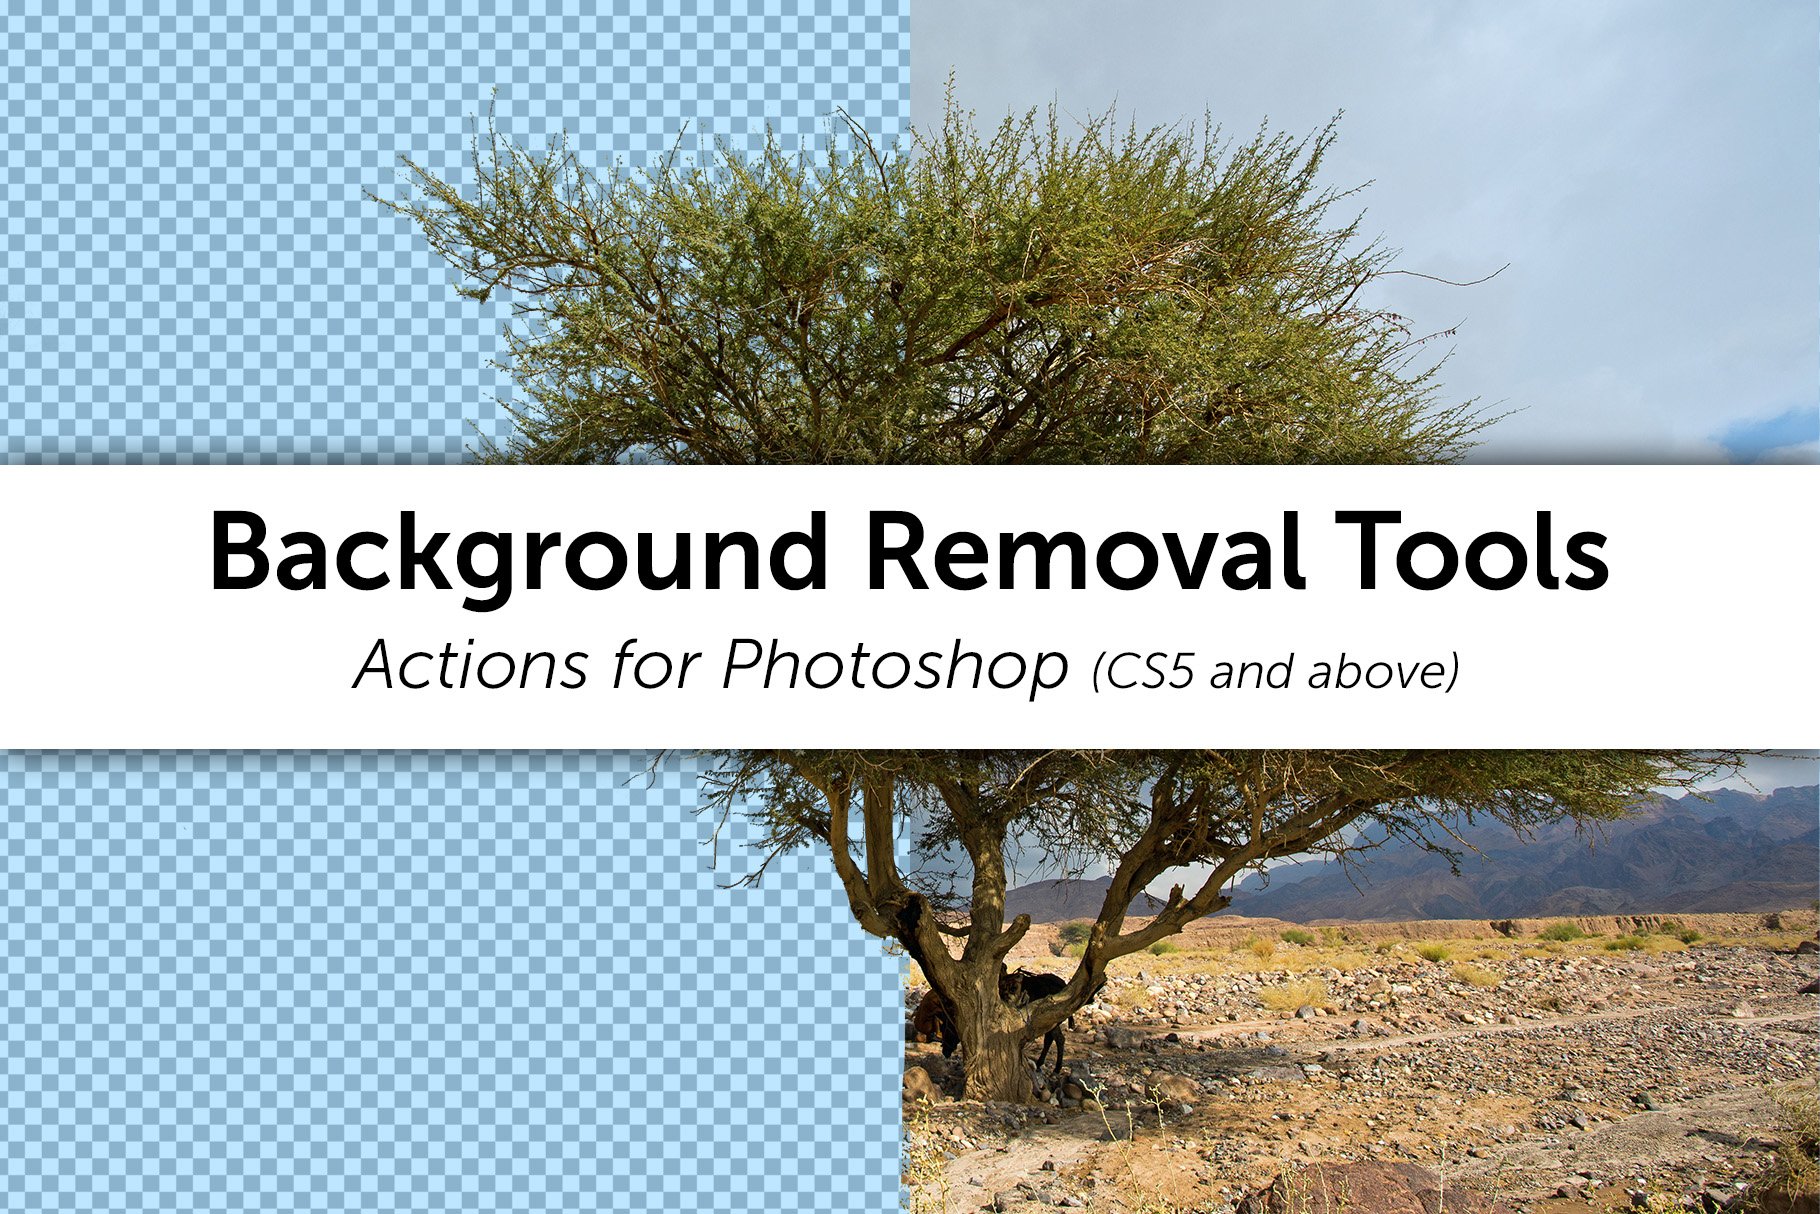 Background Removal Toolscover image.